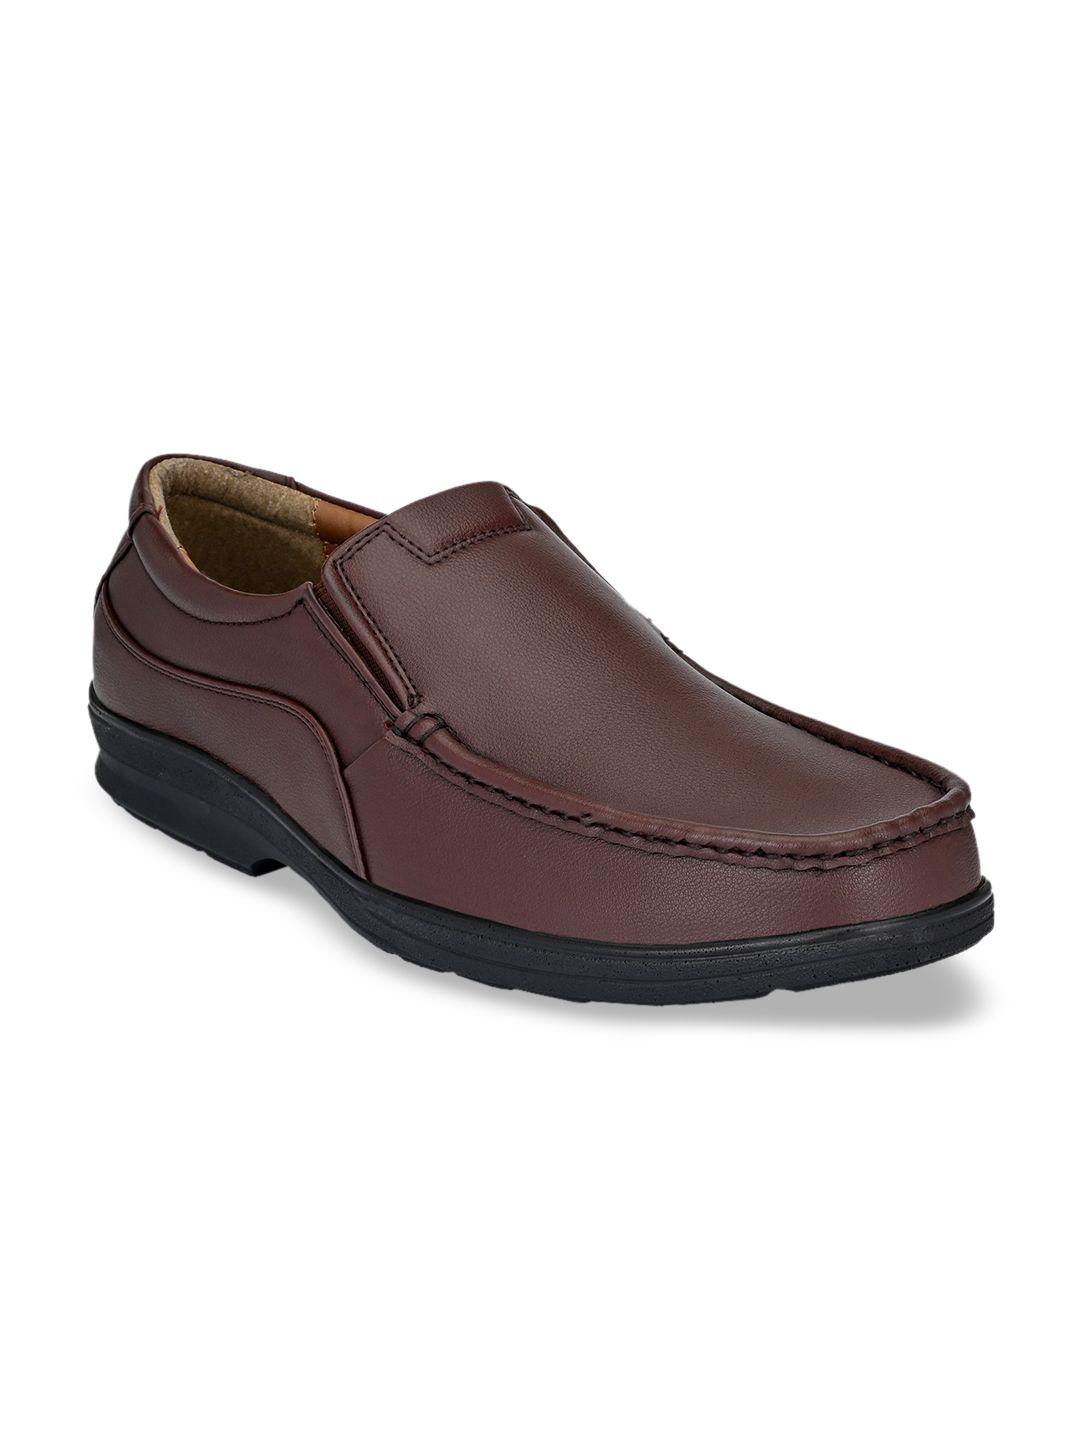 eego italy men brown solid formal slip-on loafers